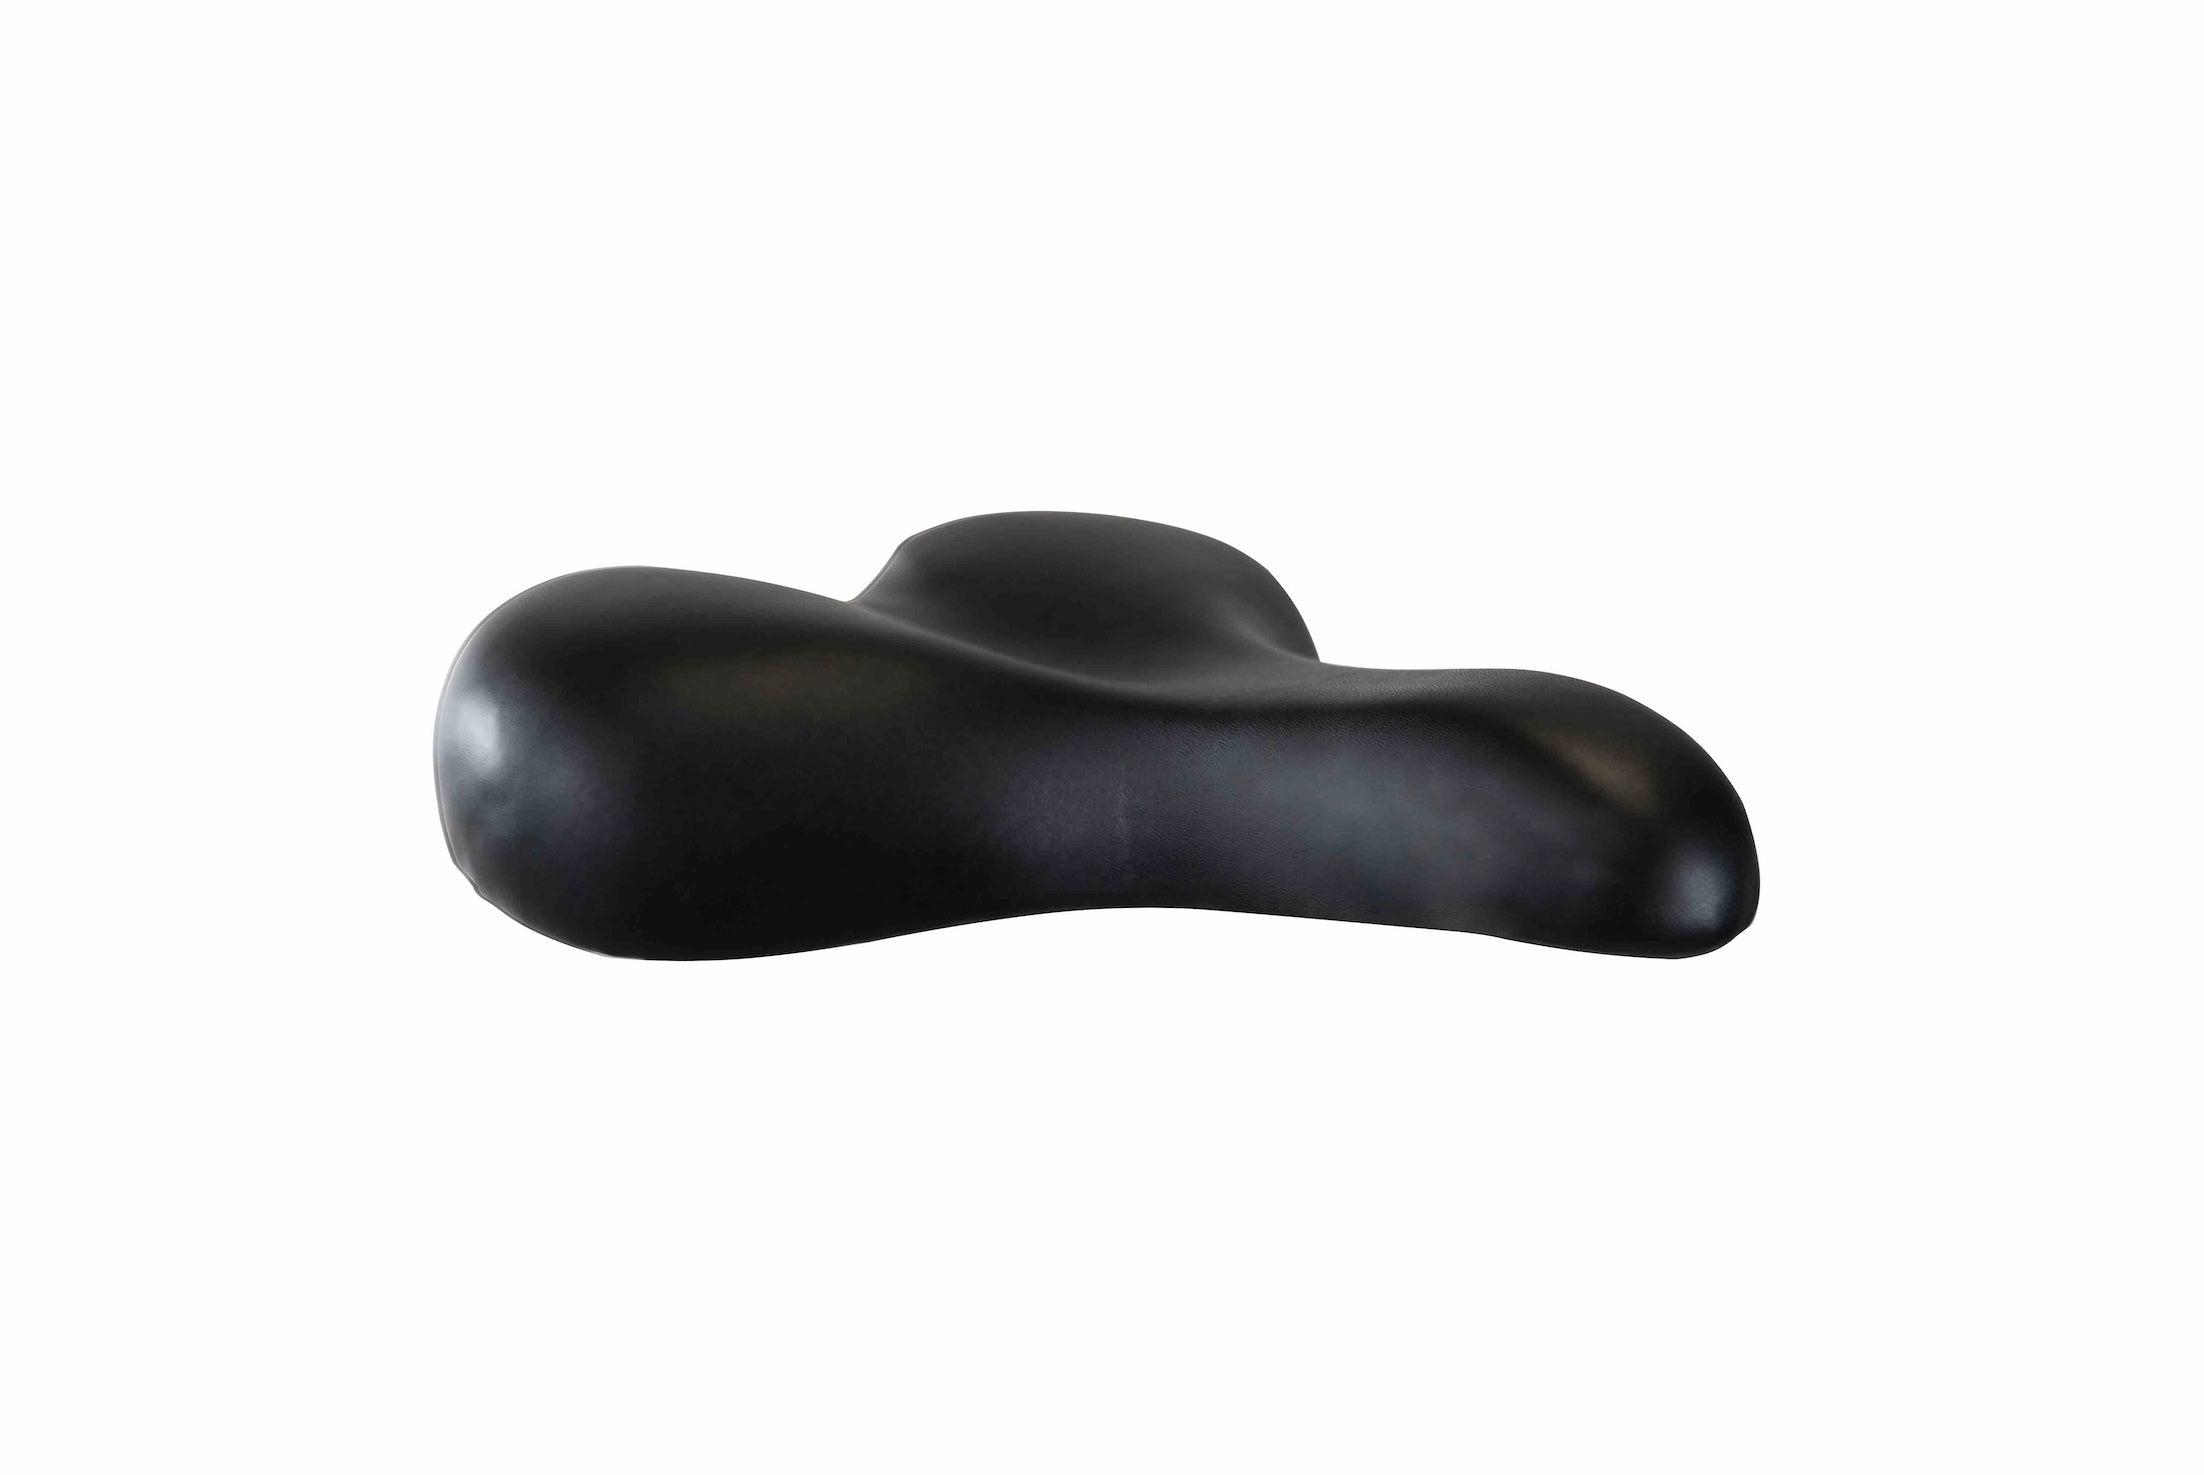 A bike seat available standard on most Rad Power Bikes models.